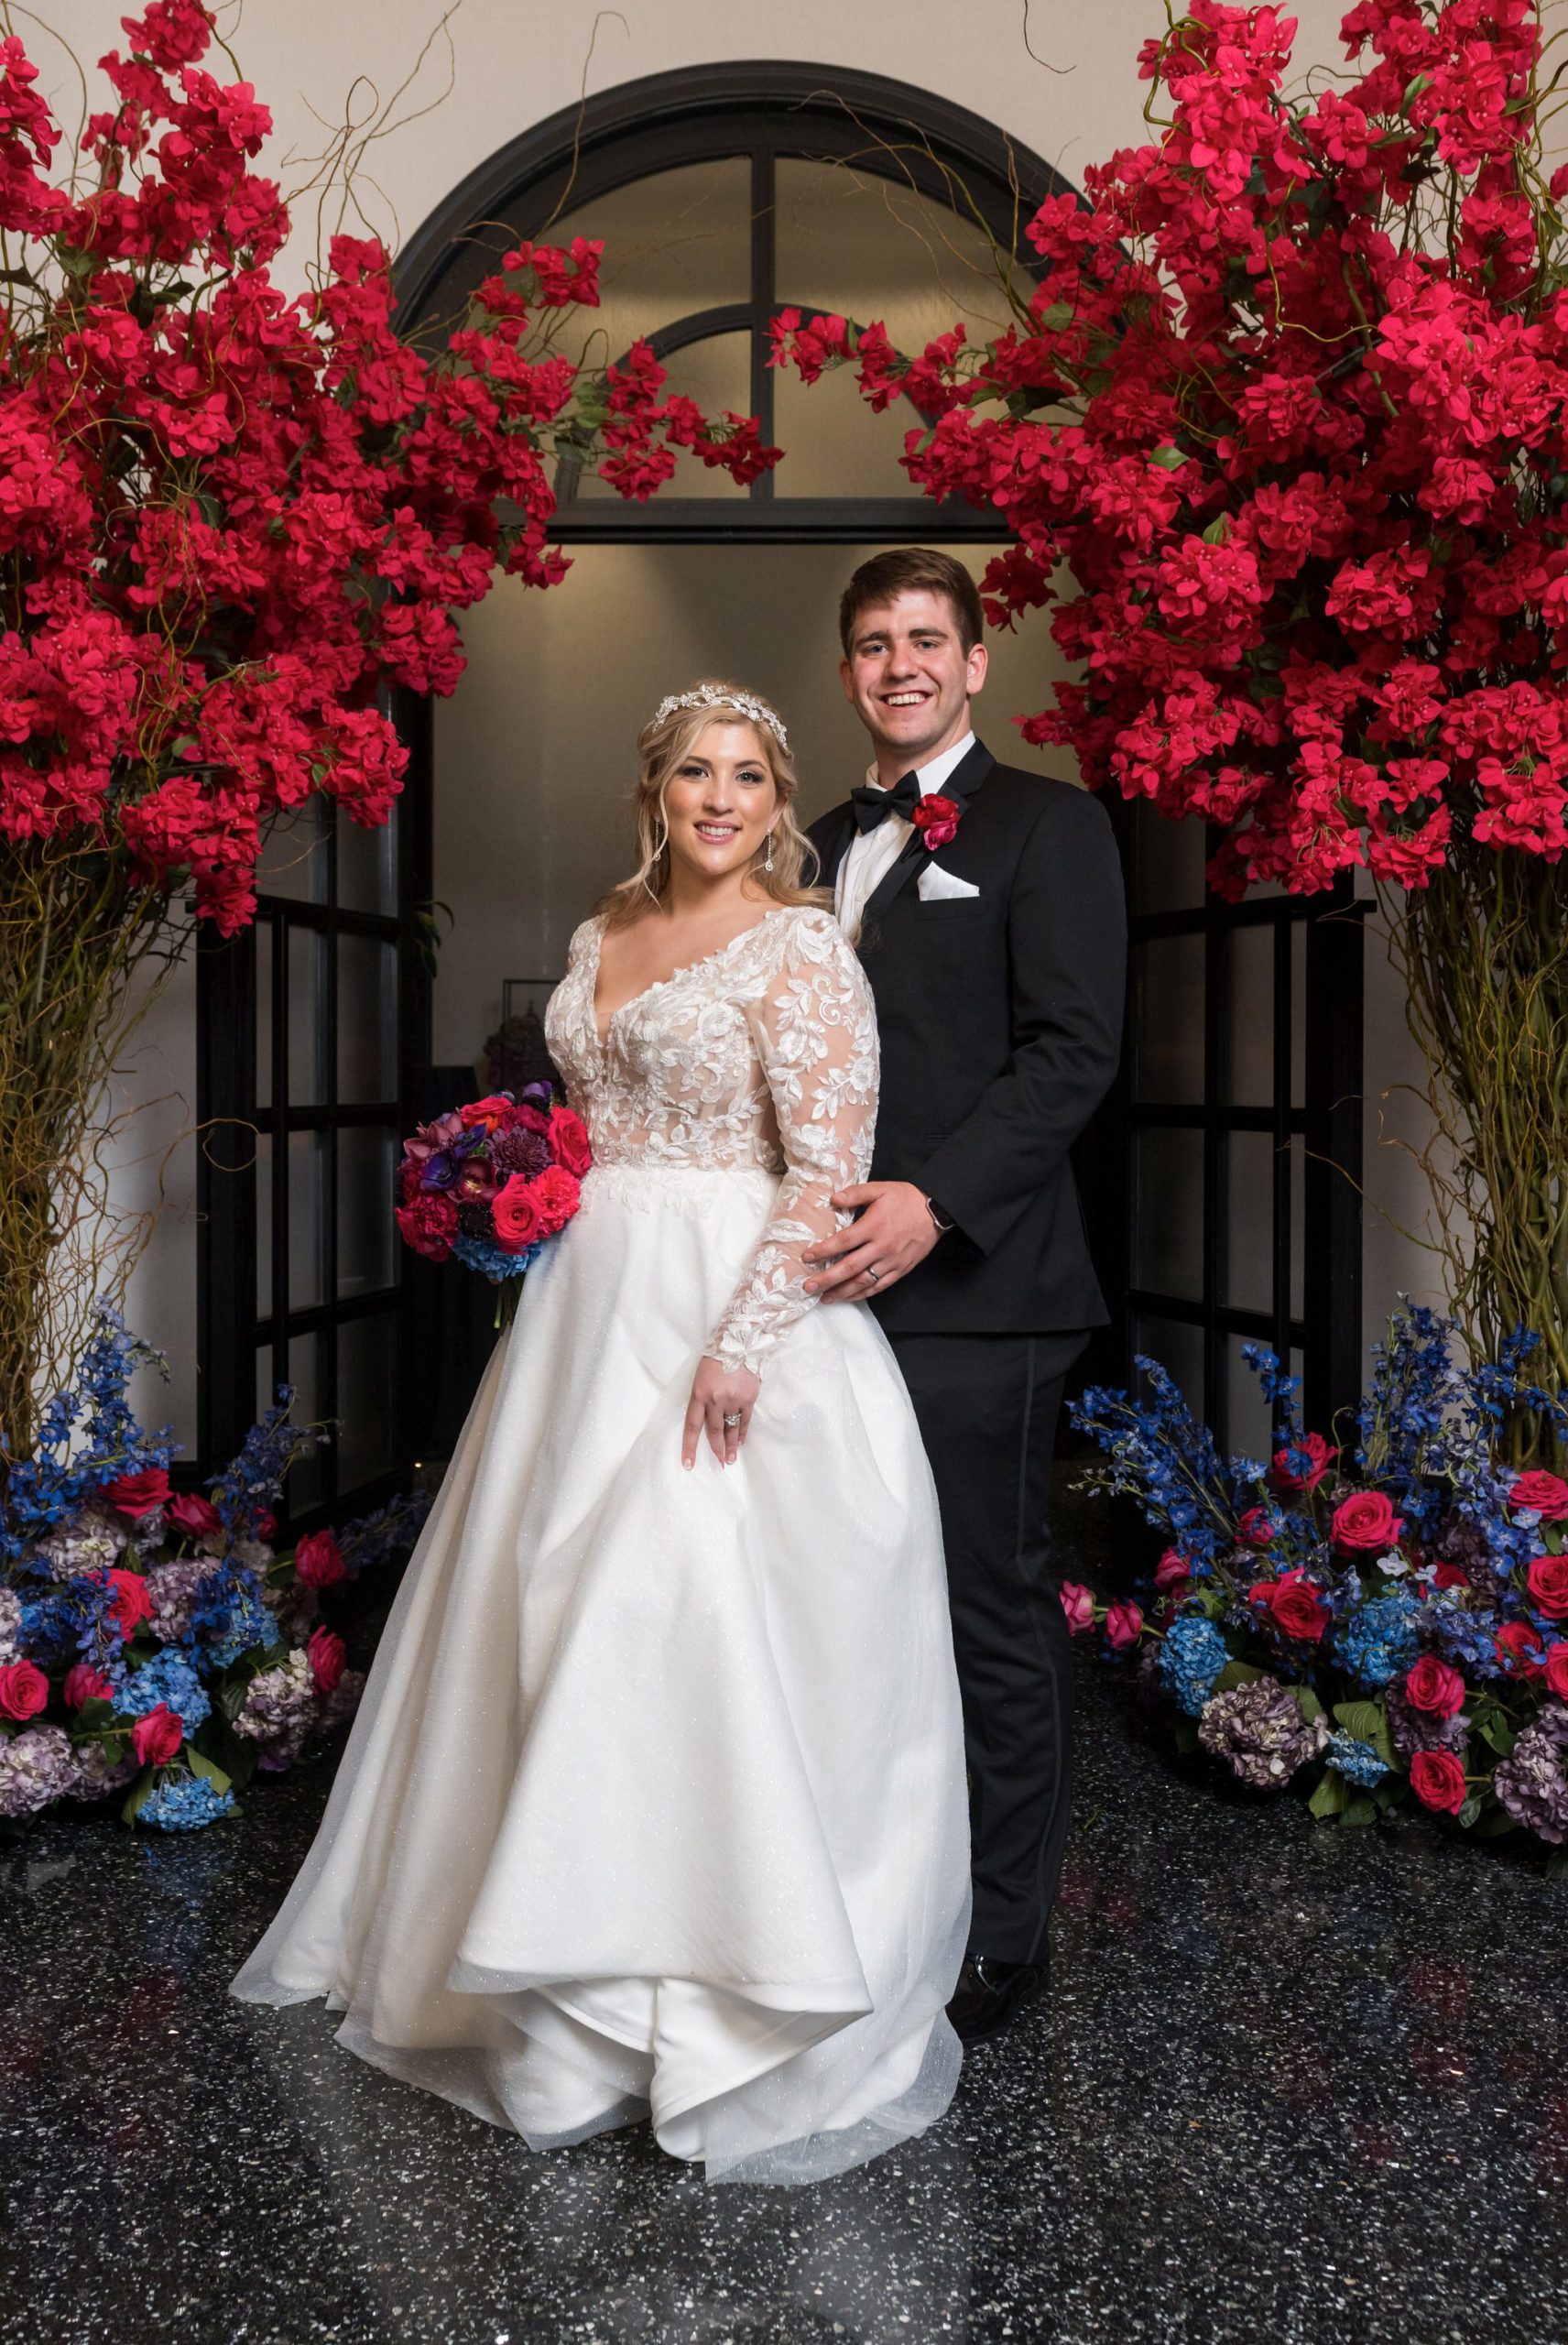 A bride and groom pose under a colorful archway to the entrance of their Daxton Hotel wedding.  